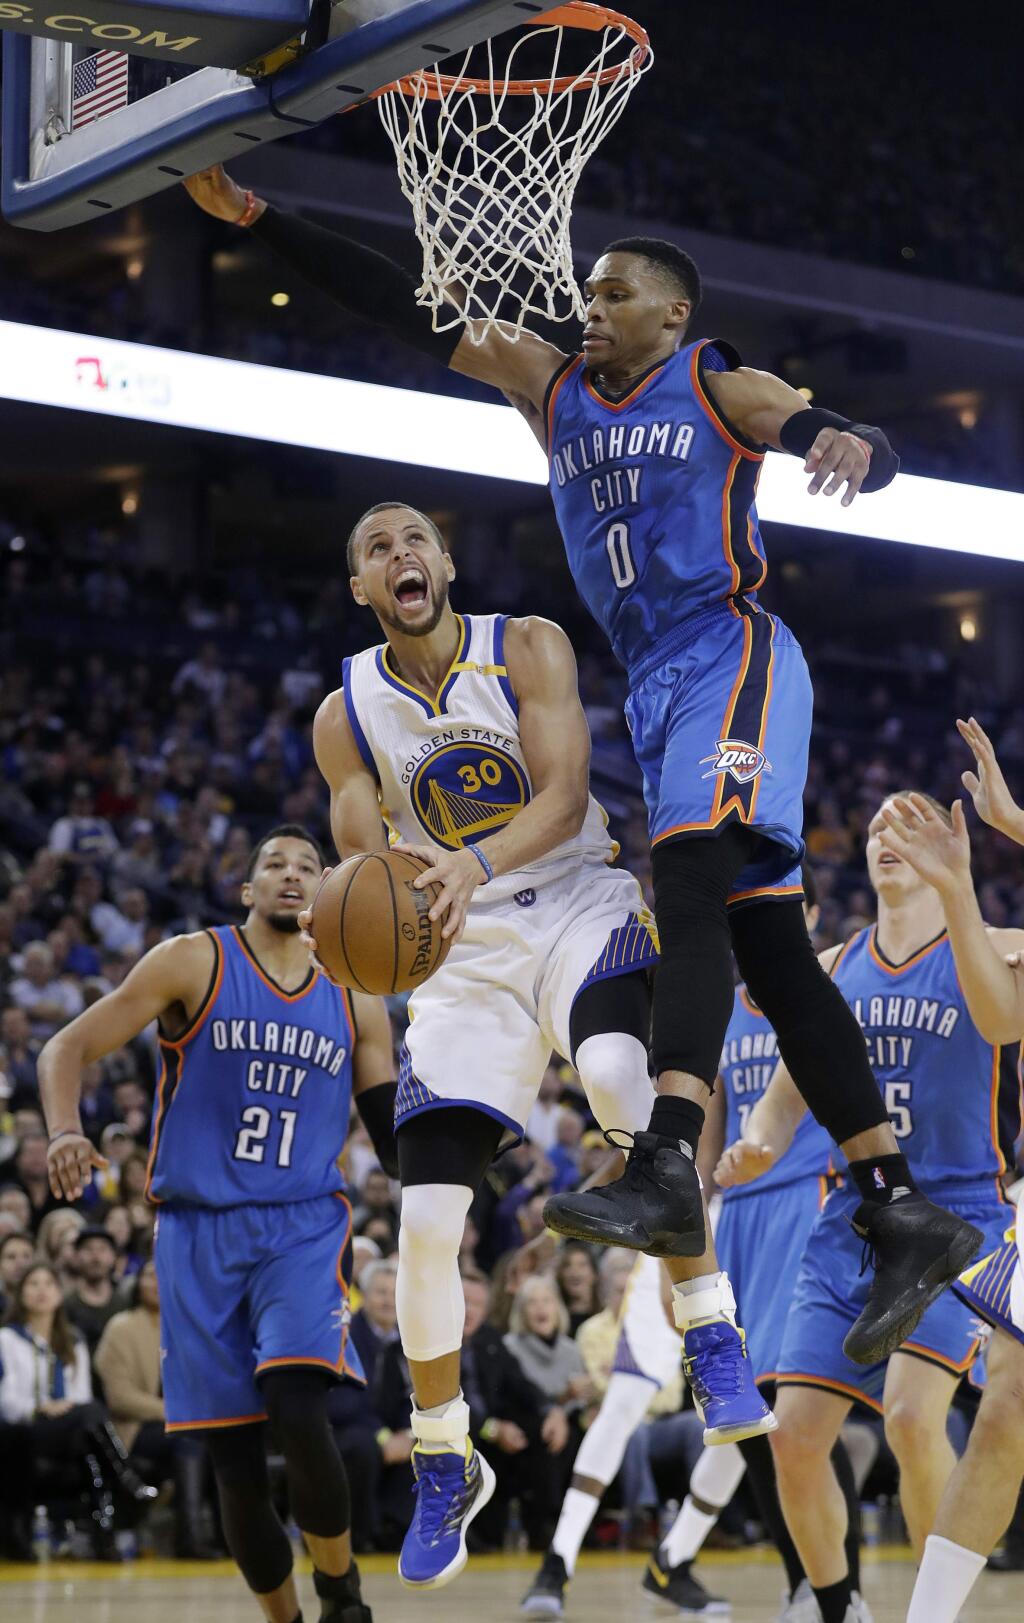 Golden State Warriors' Stephen Curry (30) is fouled while driving to the basket by Oklahoma City Thunder's Russell Westbrook (0) during the second half of an NBA basketball game Wednesday, Jan. 18, 2017, in Oakland, Calif. (AP Photo/Marcio Jose Sanchez)